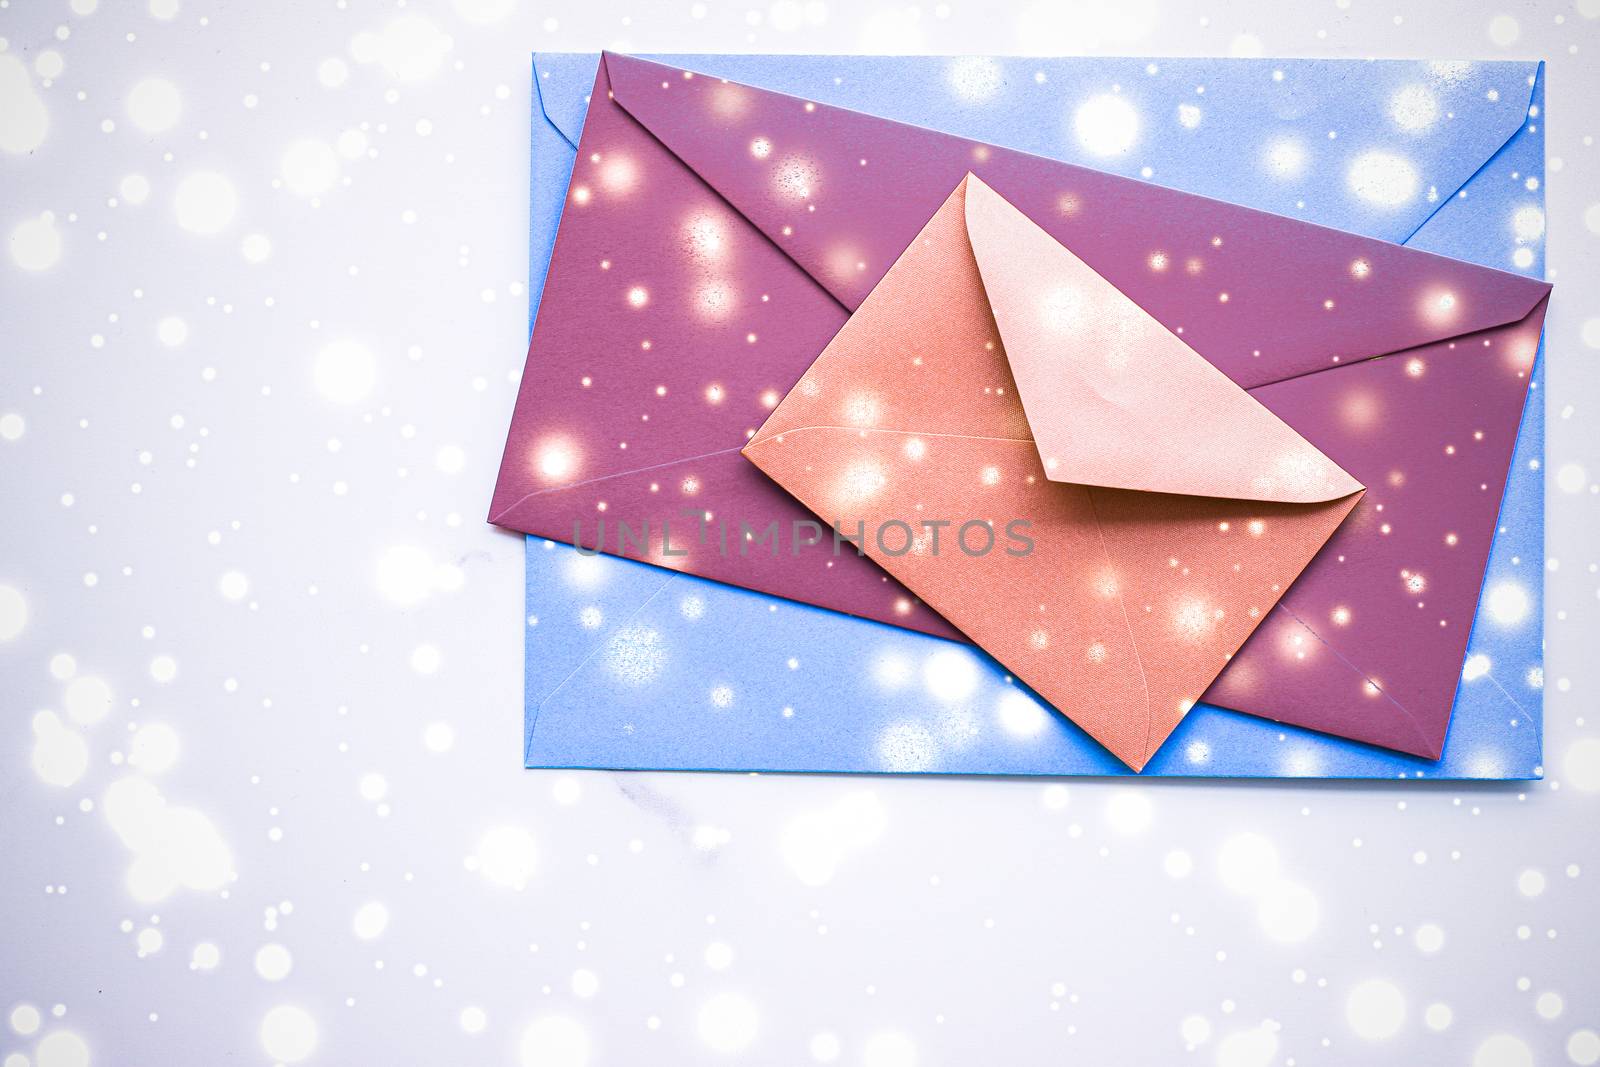 Greetings, postal service and online newsletter concept - Winter holiday blank paper envelopes on marble with shiny snow flatlay background, love letter or Christmas mail card design